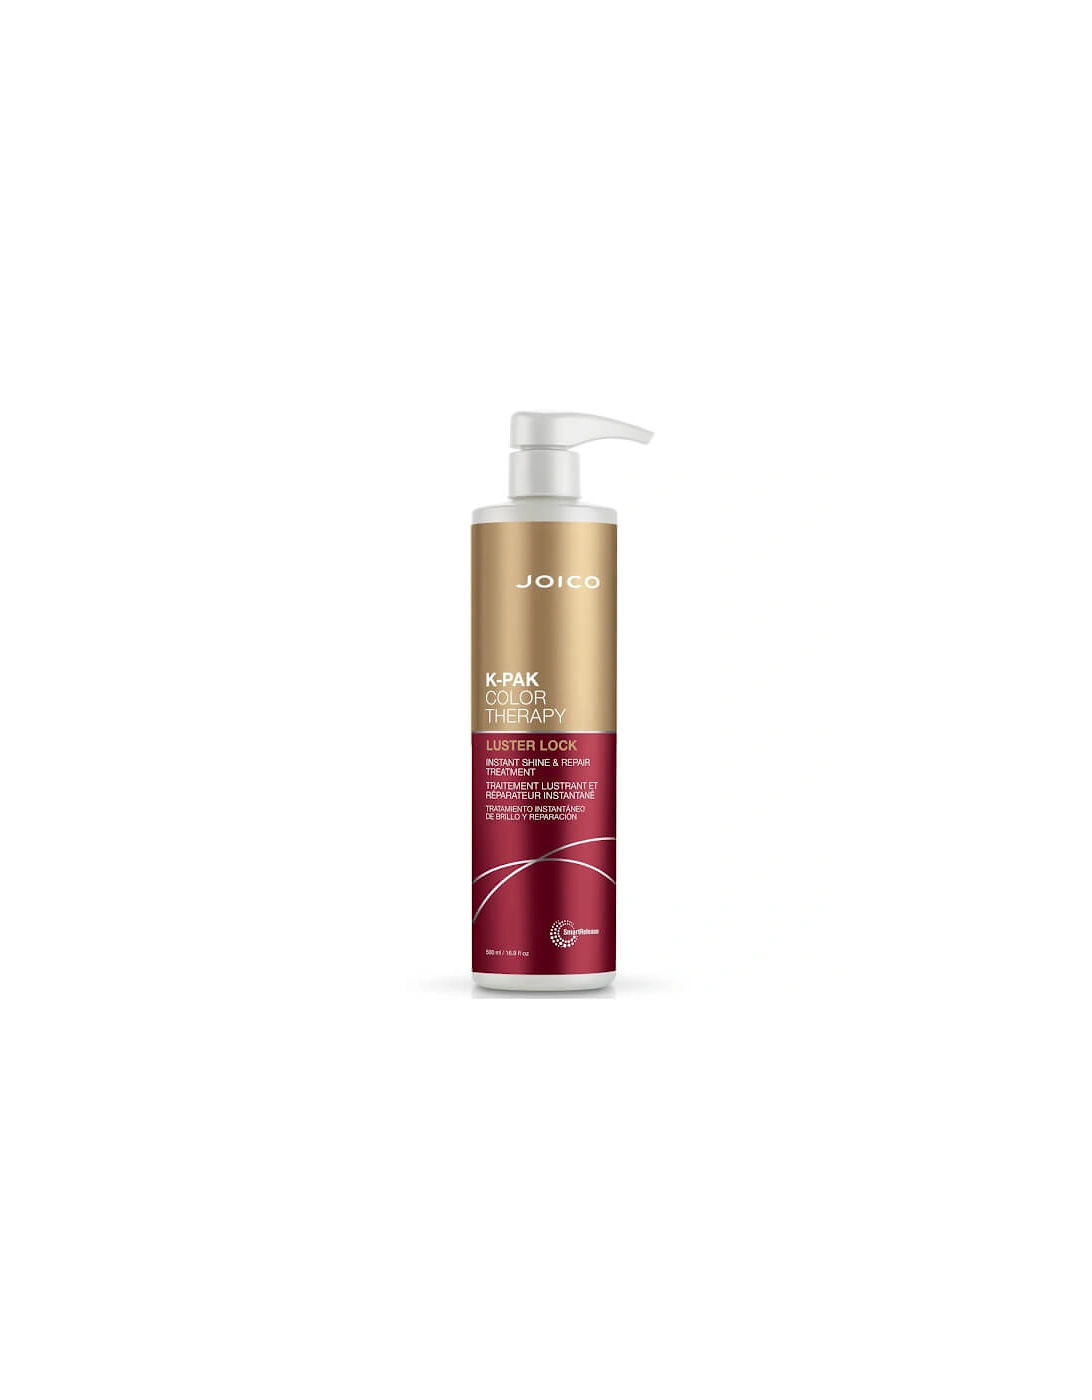 K-Pak Colour Therapy Luster Lock Instant Shine and Repair Treatment 500ml (Worth £84.00) - Joico, 2 of 1